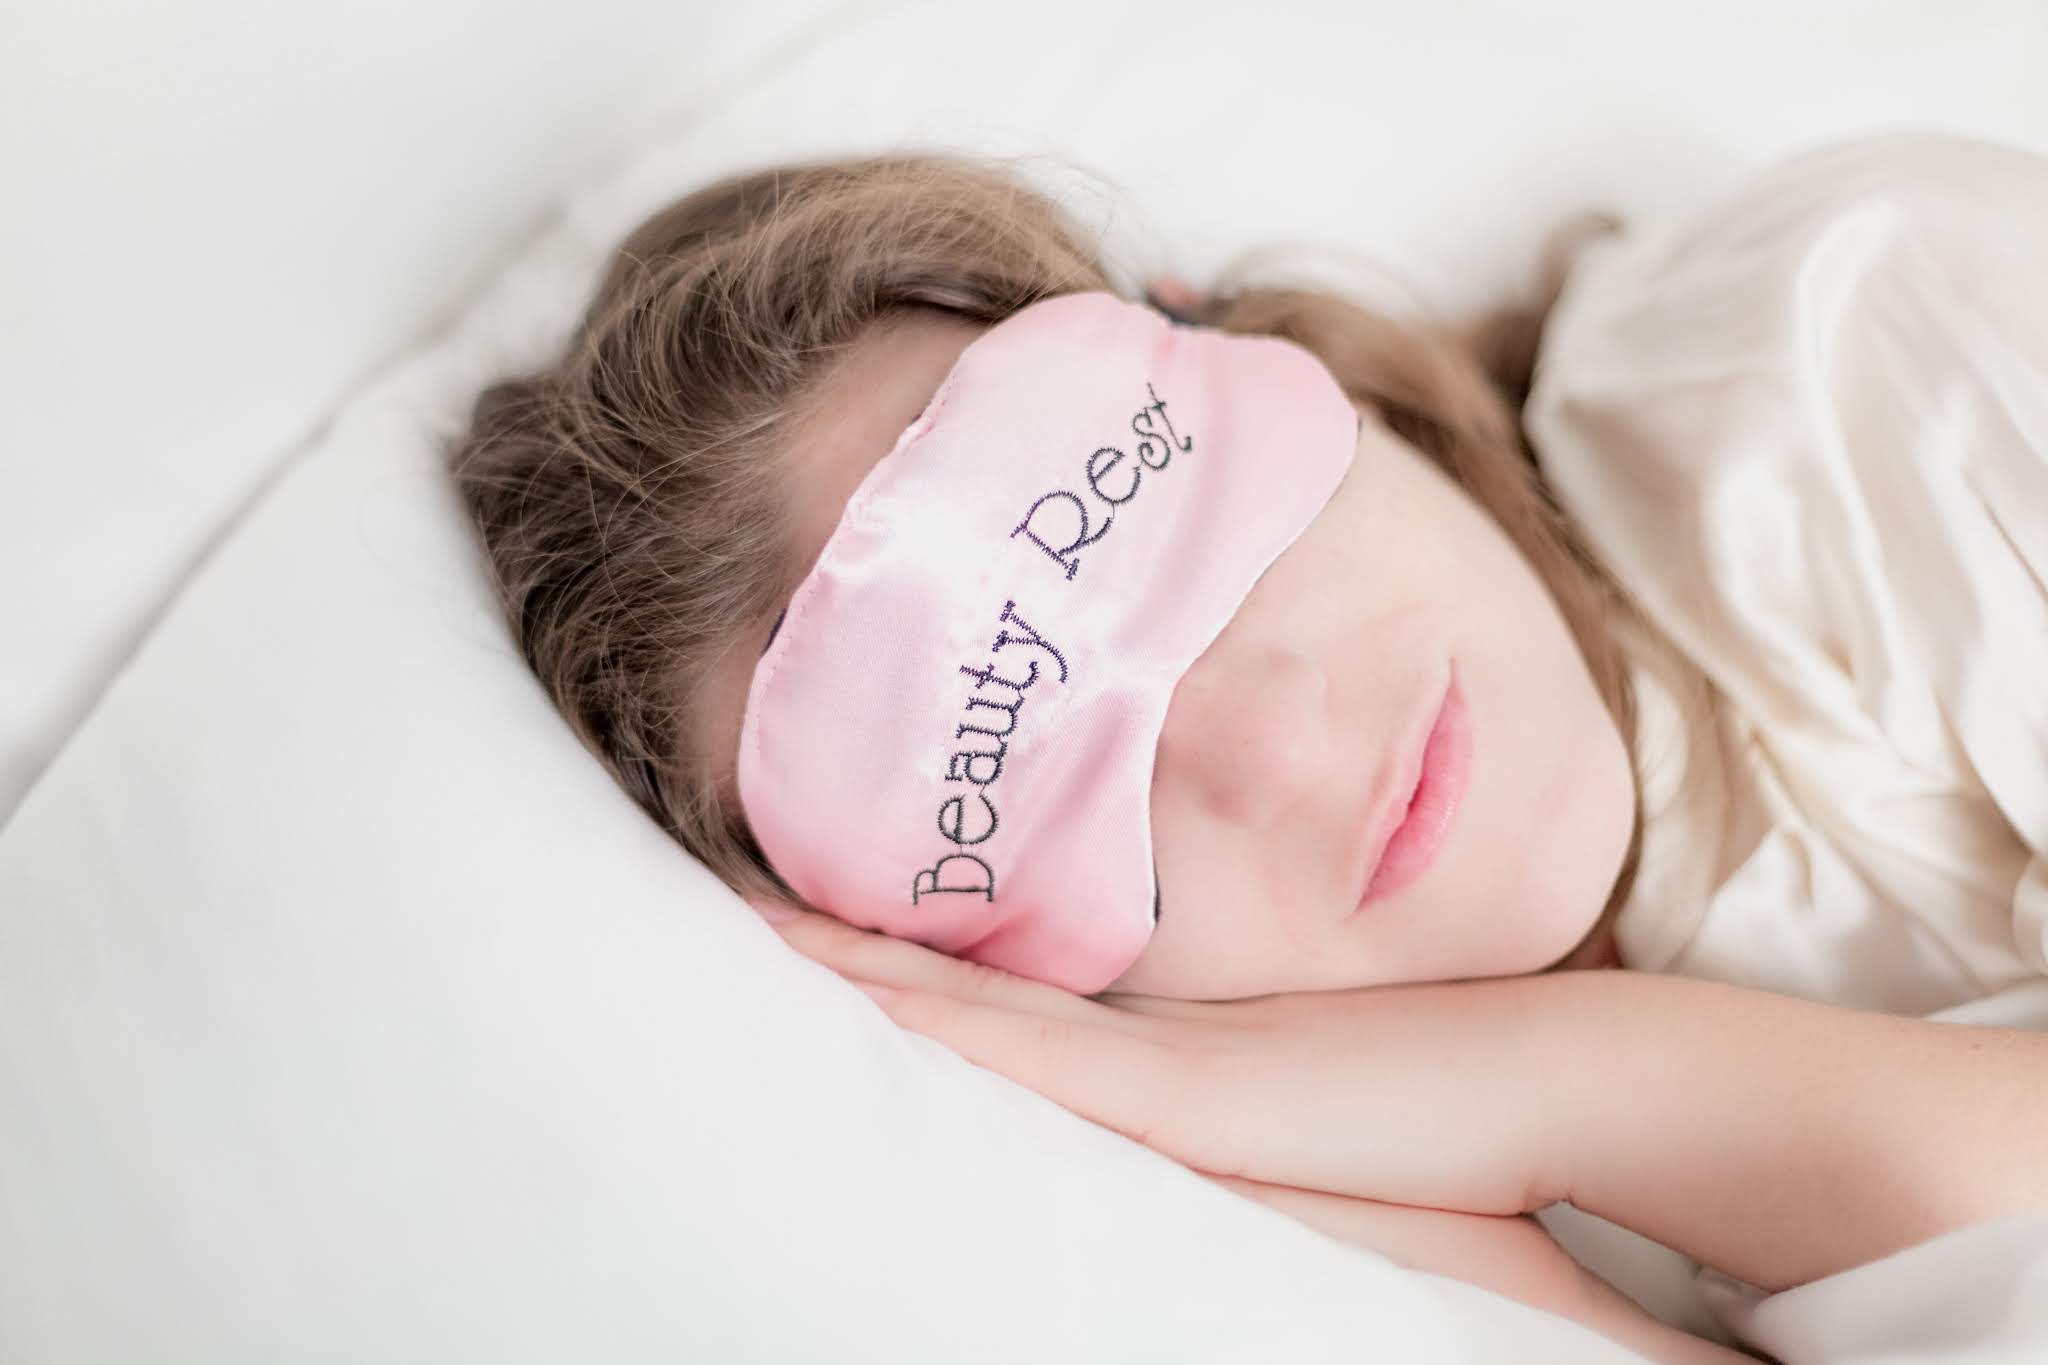 A woman rests her head on a pillow and wears a pink satin mask that states: "Beauty Rest", allowing her to catch a little extra sleep.